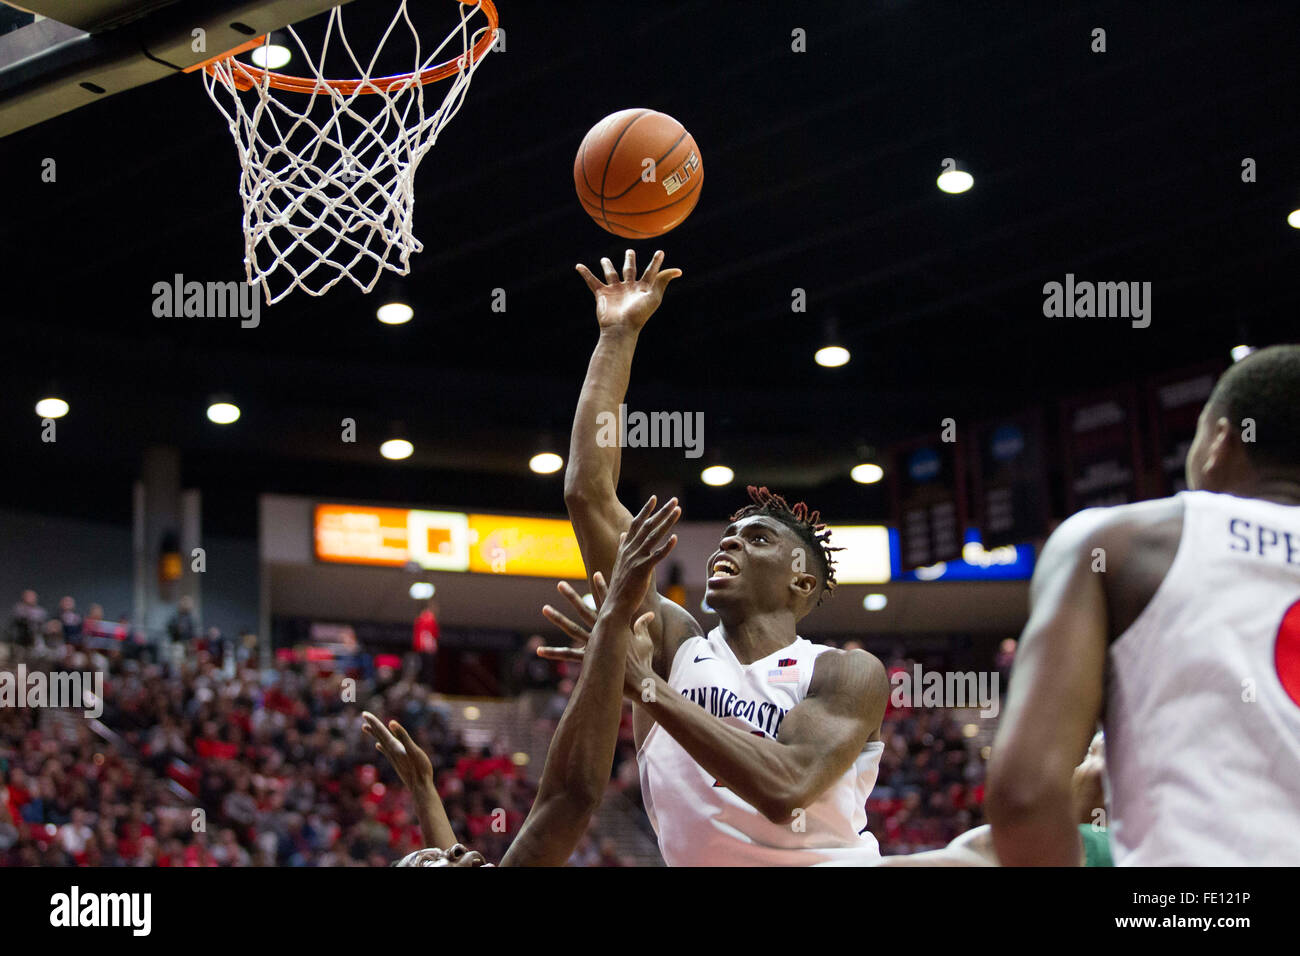 San Diego, California, USA. 2nd Feb, 2016. February 2, 2016] SDSU forward Zylan Cheatham hits a layup during Tuesday's game between San Diego State University and Colorado State University. Chadd Cady/For The San Diego Union-Tribune © Chadd Cady/U-T San Diego/ZUMA Wire/Alamy Live News Stock Photo